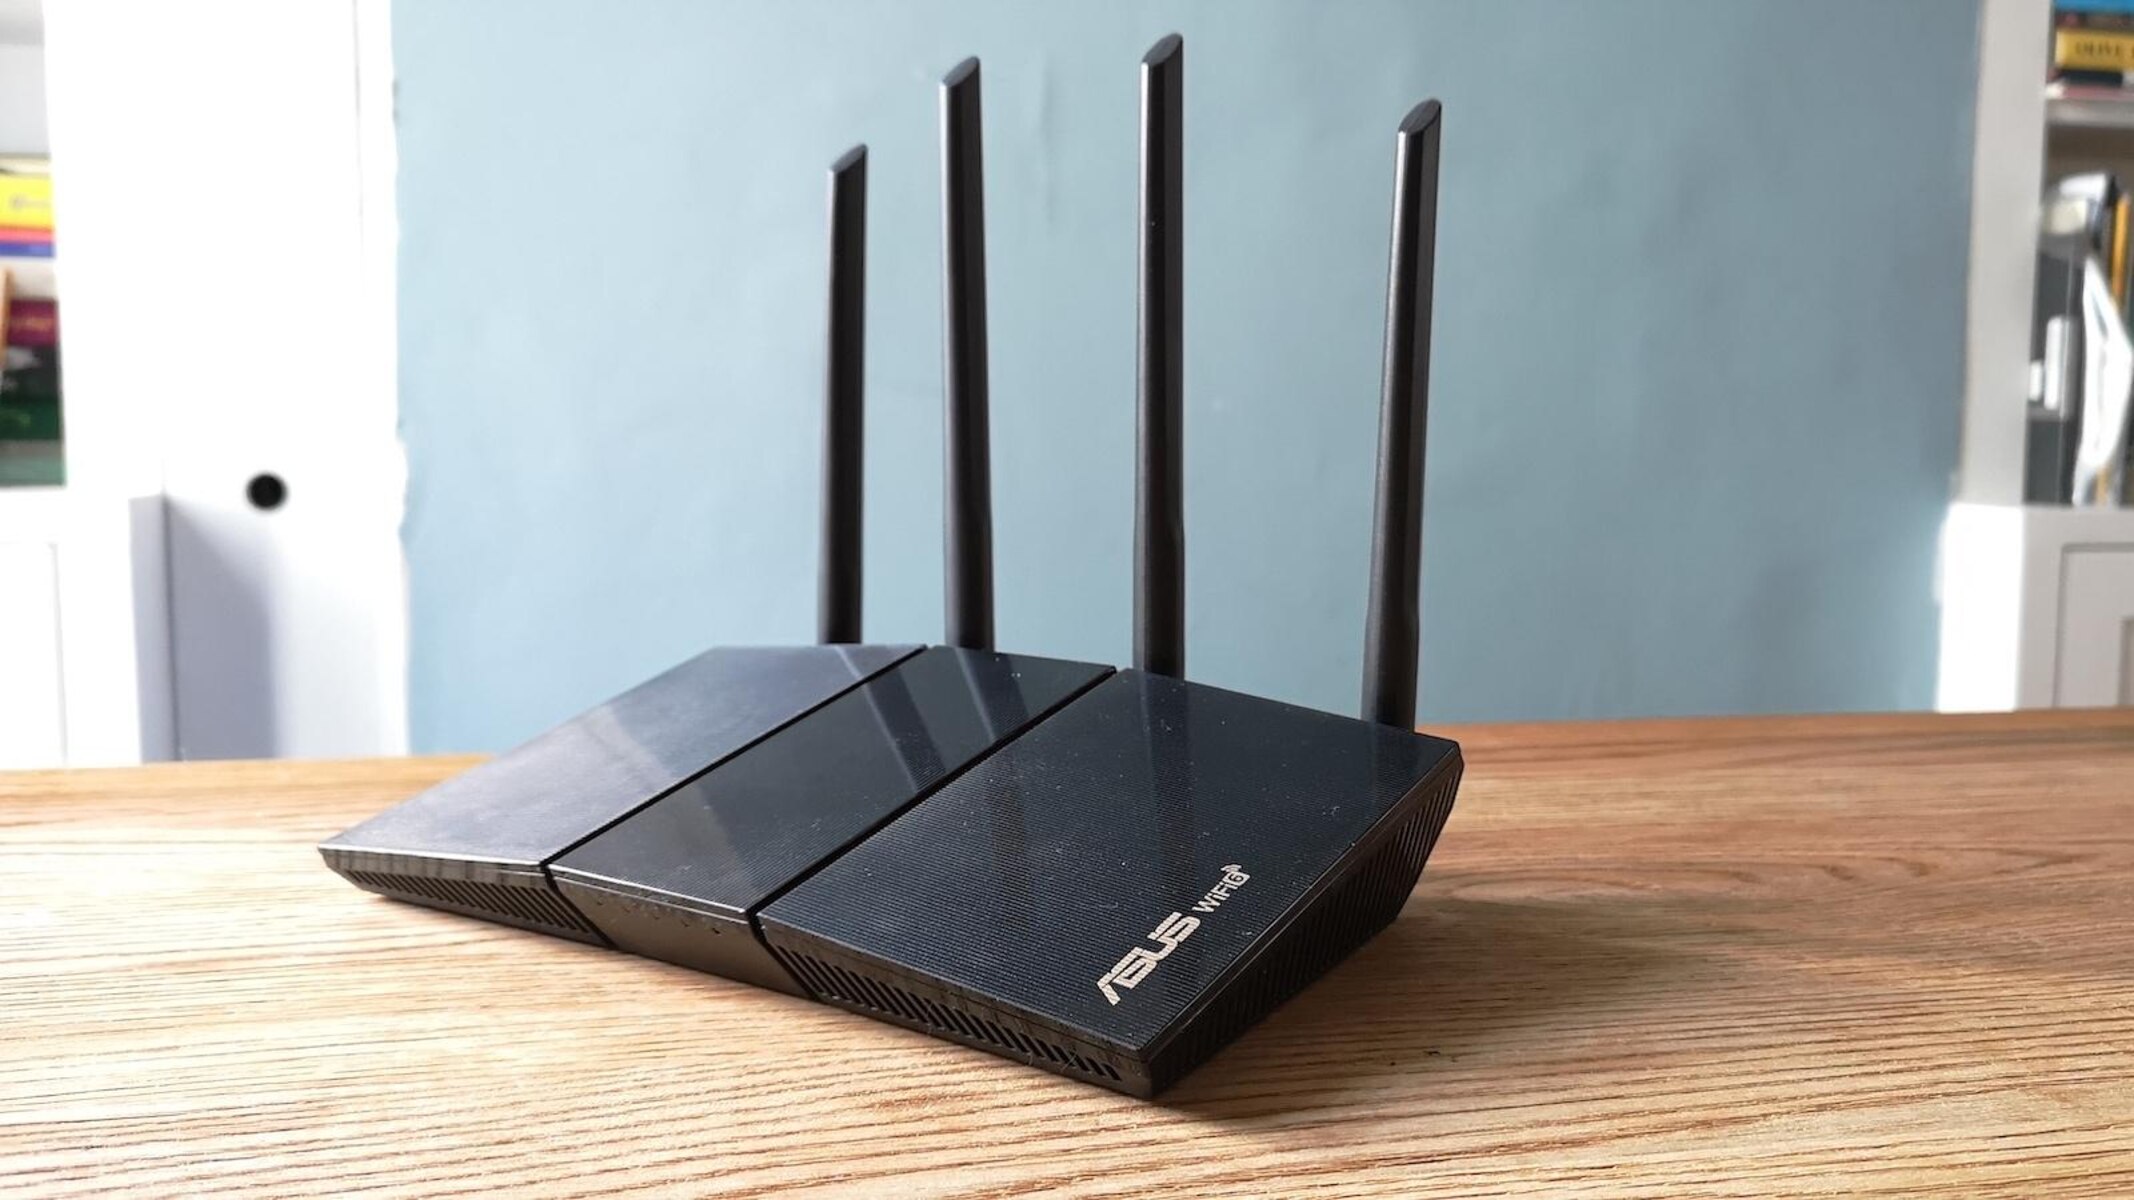 How To Speed Up My Wireless Router